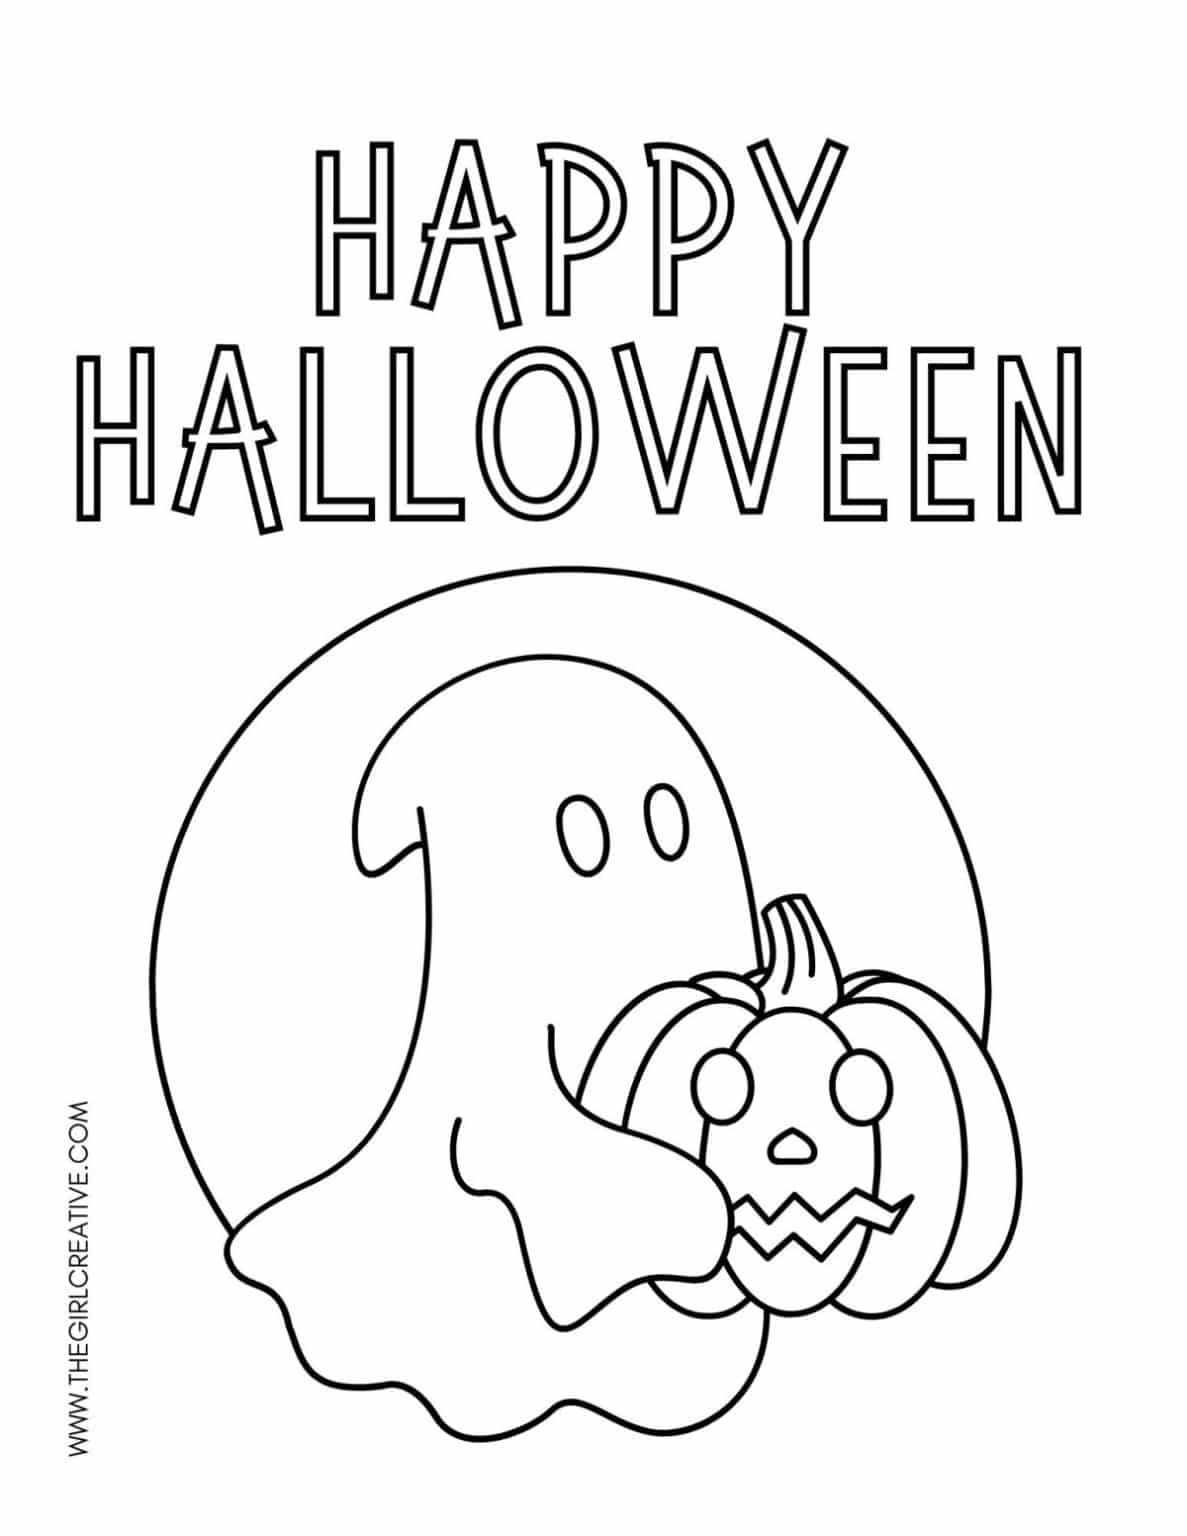 Easy Halloween Coloring Pages - The Girl Creative